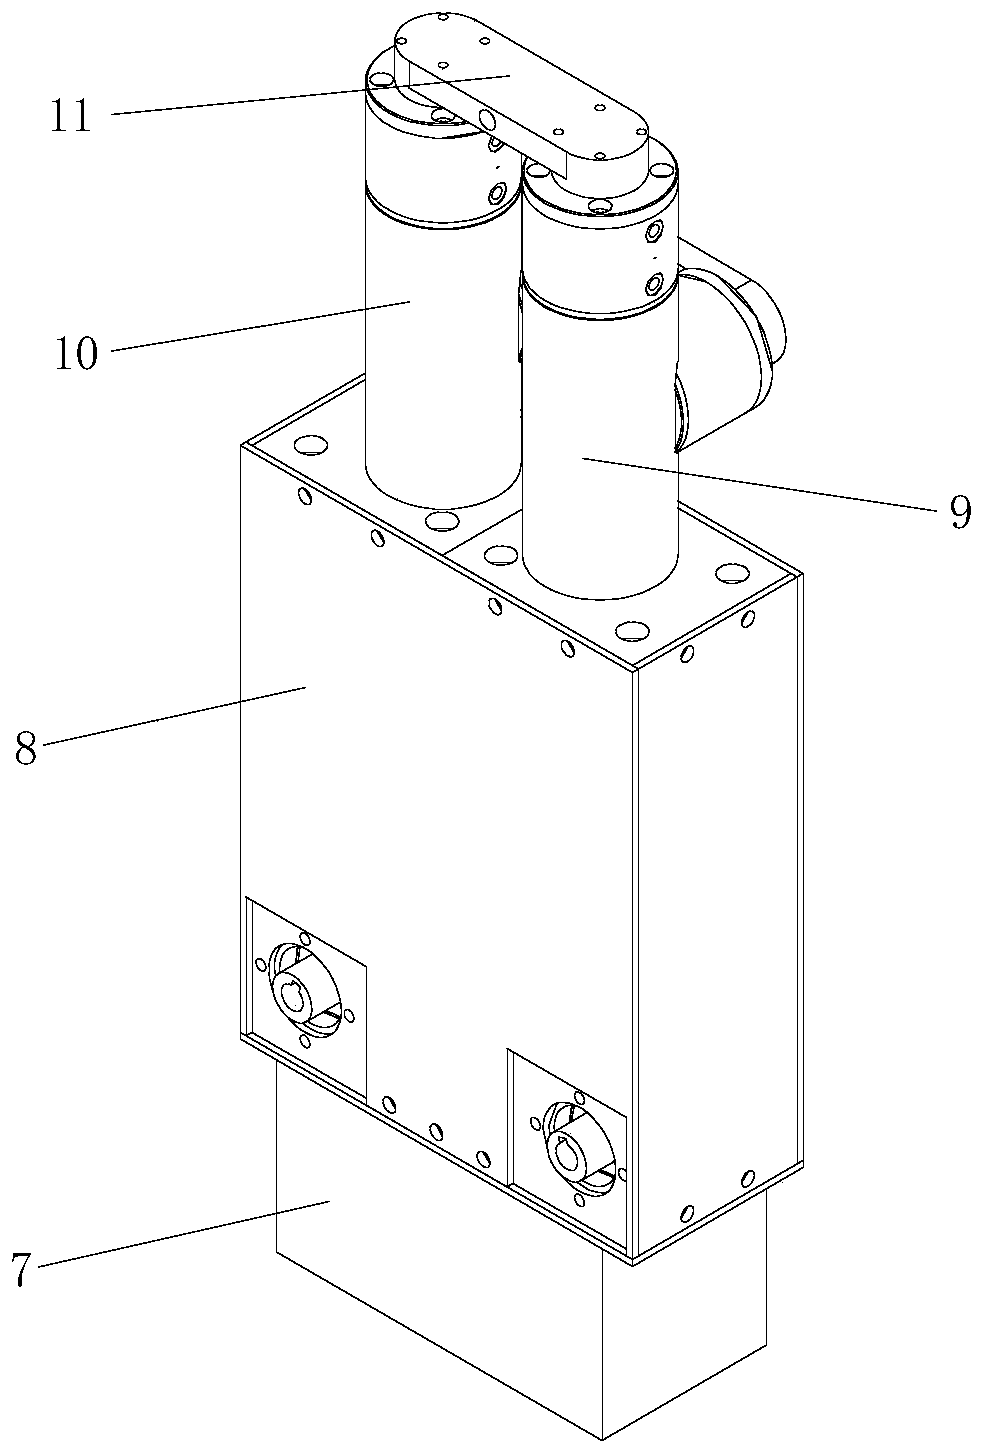 Constant-speed and constant-pressure pump device